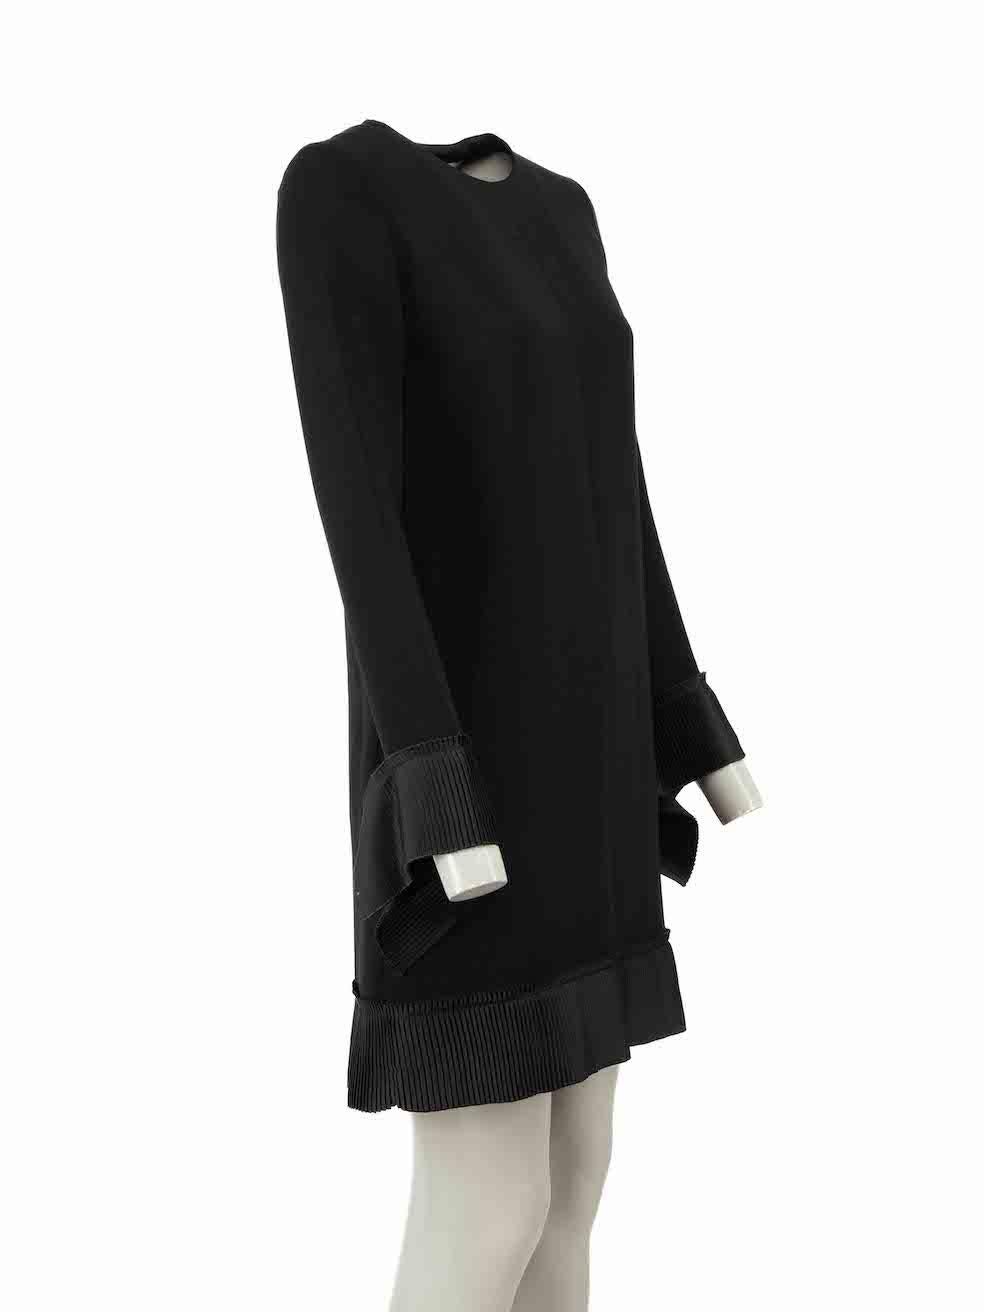 CONDITION is Very good. Minimal wear to dress is evident. Minimal wear to the underarm linings with light discolouration on this used Victoria Victoria Beckham designer resale item.
 
Details
Black
Polyester
Dress
Long sleeves
Mini
Round neck
Pleat